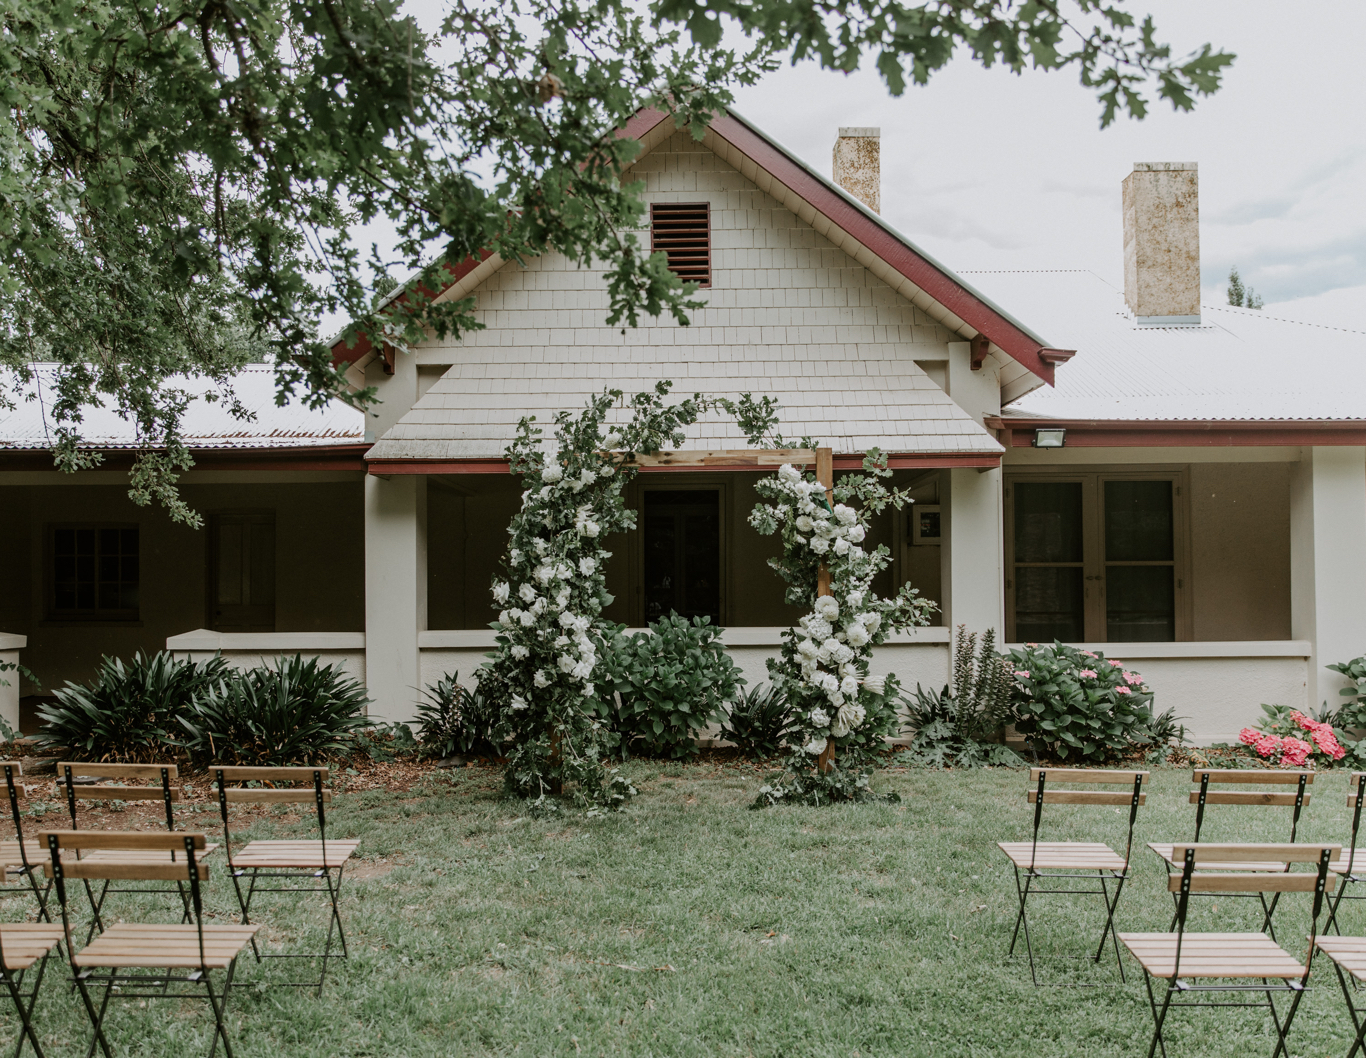 Wedding ceremony setup in front of a homestead and floral archway.